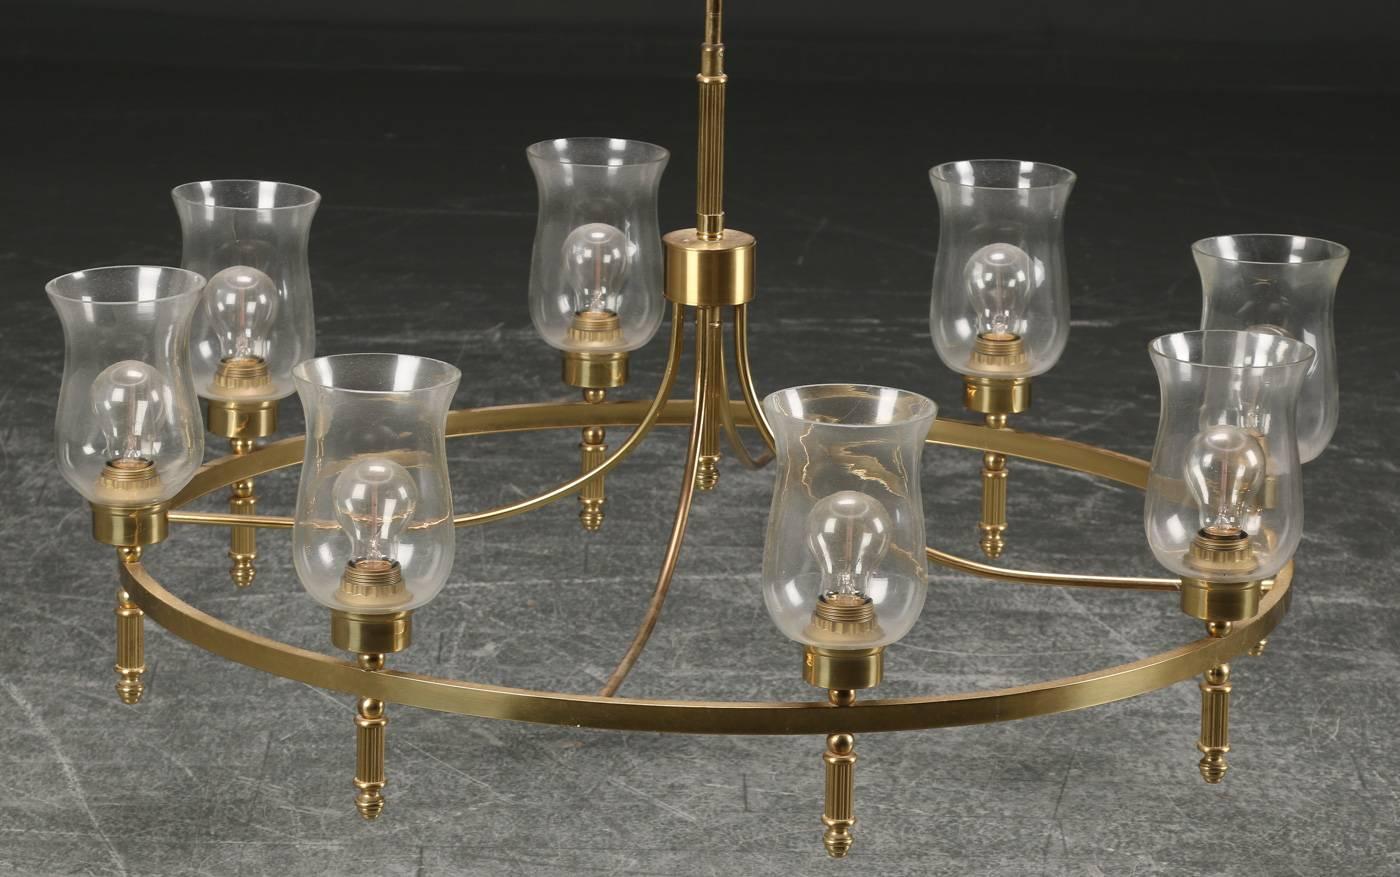 Large hall chandelier by Svend Mejlstrøm from the 1960s.
Brass construction fitted with eight E27 sockets and hand blow clear glass shades.
Signed Mejlstrøm lighting.
Dimensions: H 265 cm, Ø 90 cm.